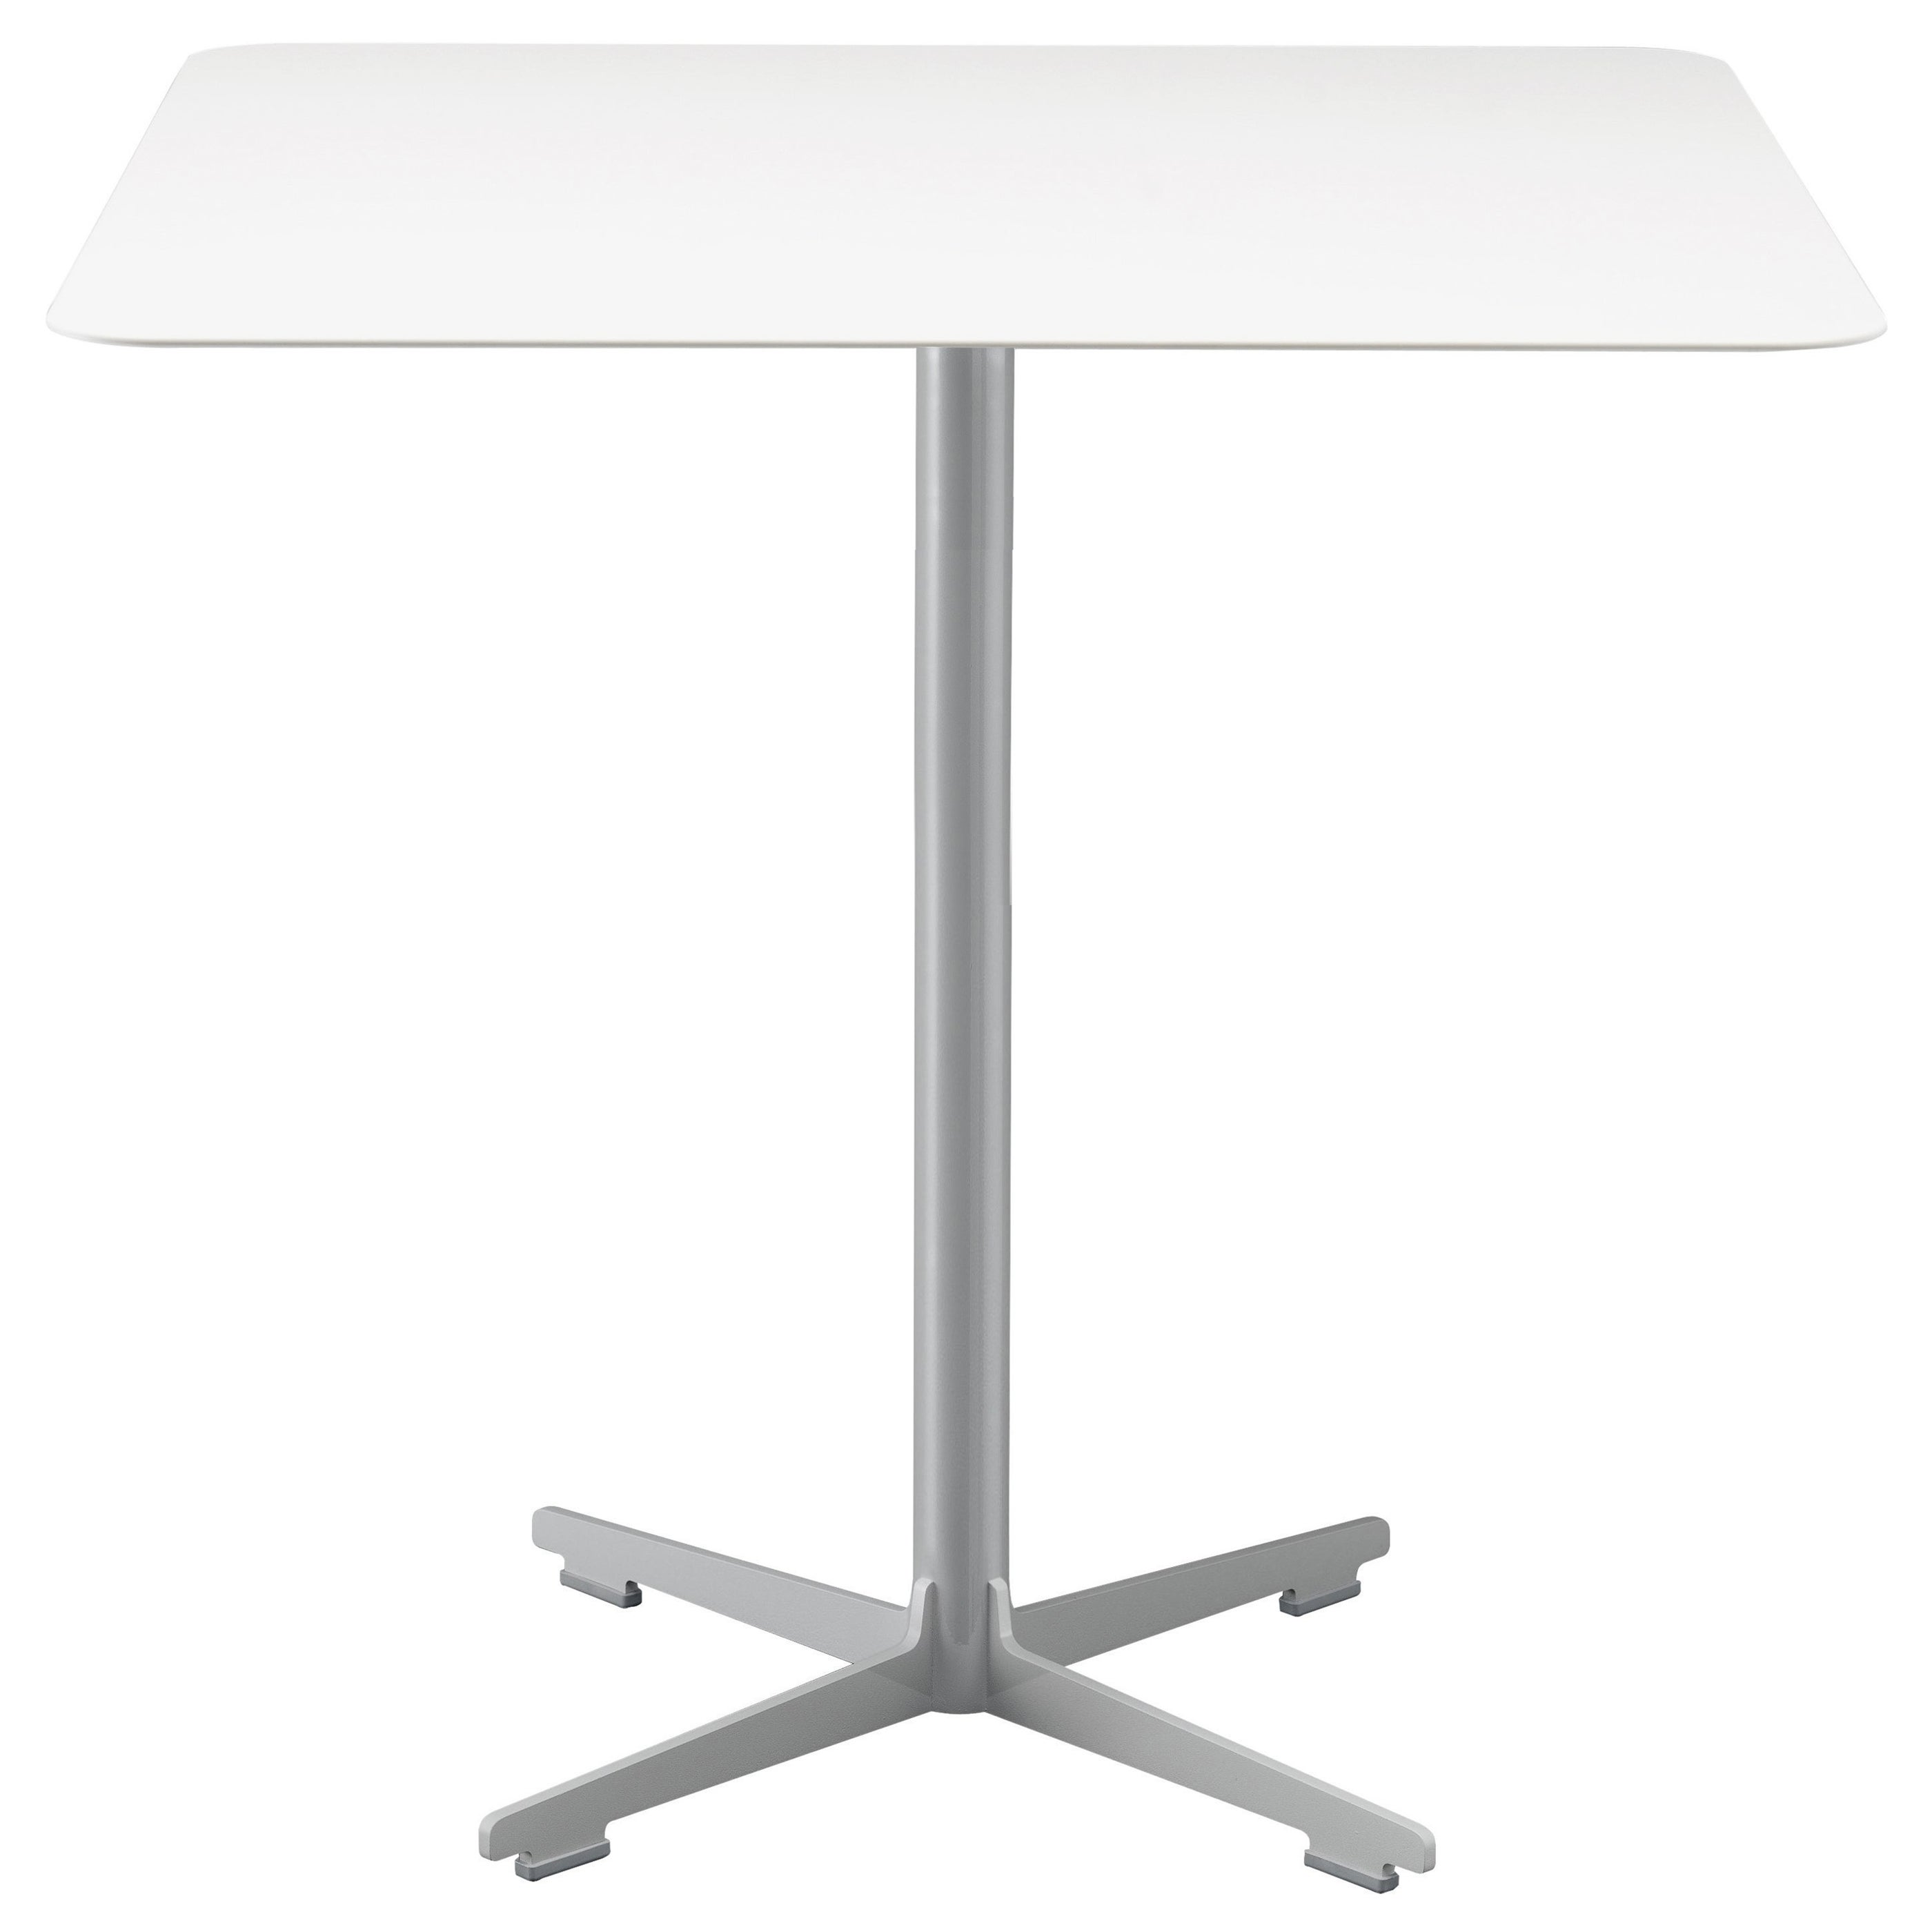 Alias Large 577 Cross Table with Light Grey Top and Lacquered Steel Base For Sale